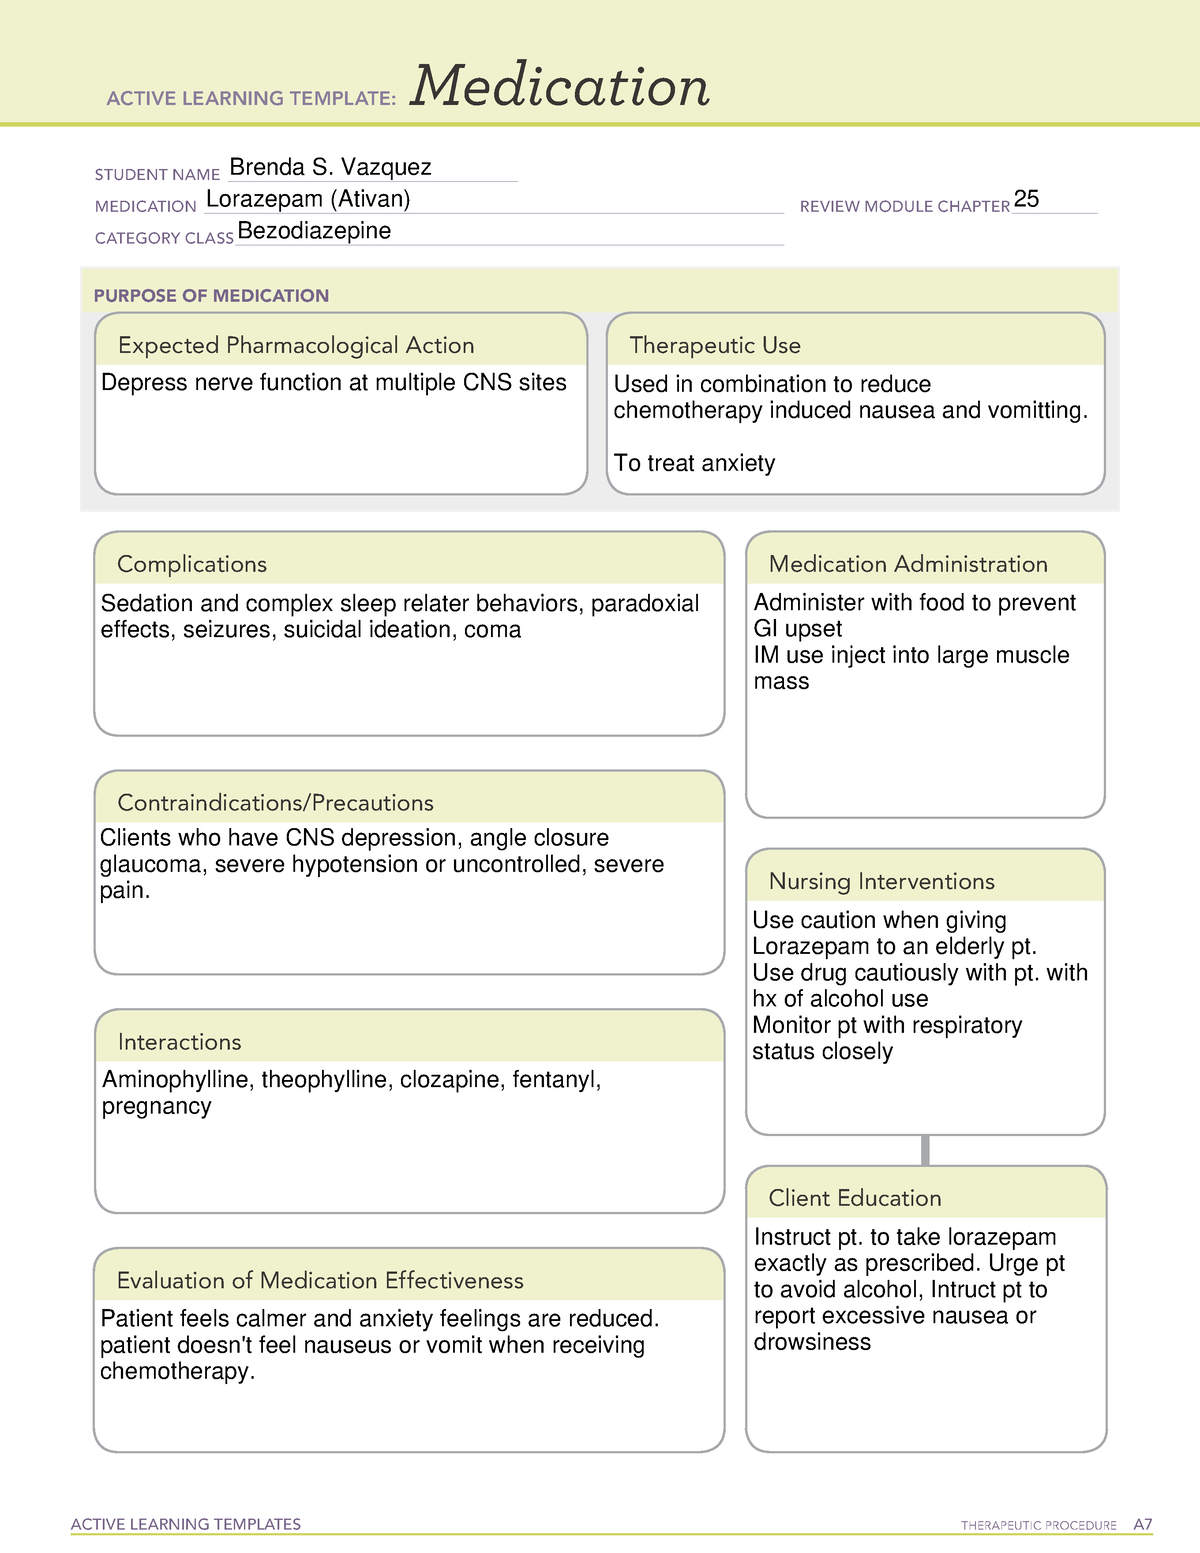 lorazepam-med-card-active-learning-templates-therapeutic-procedure